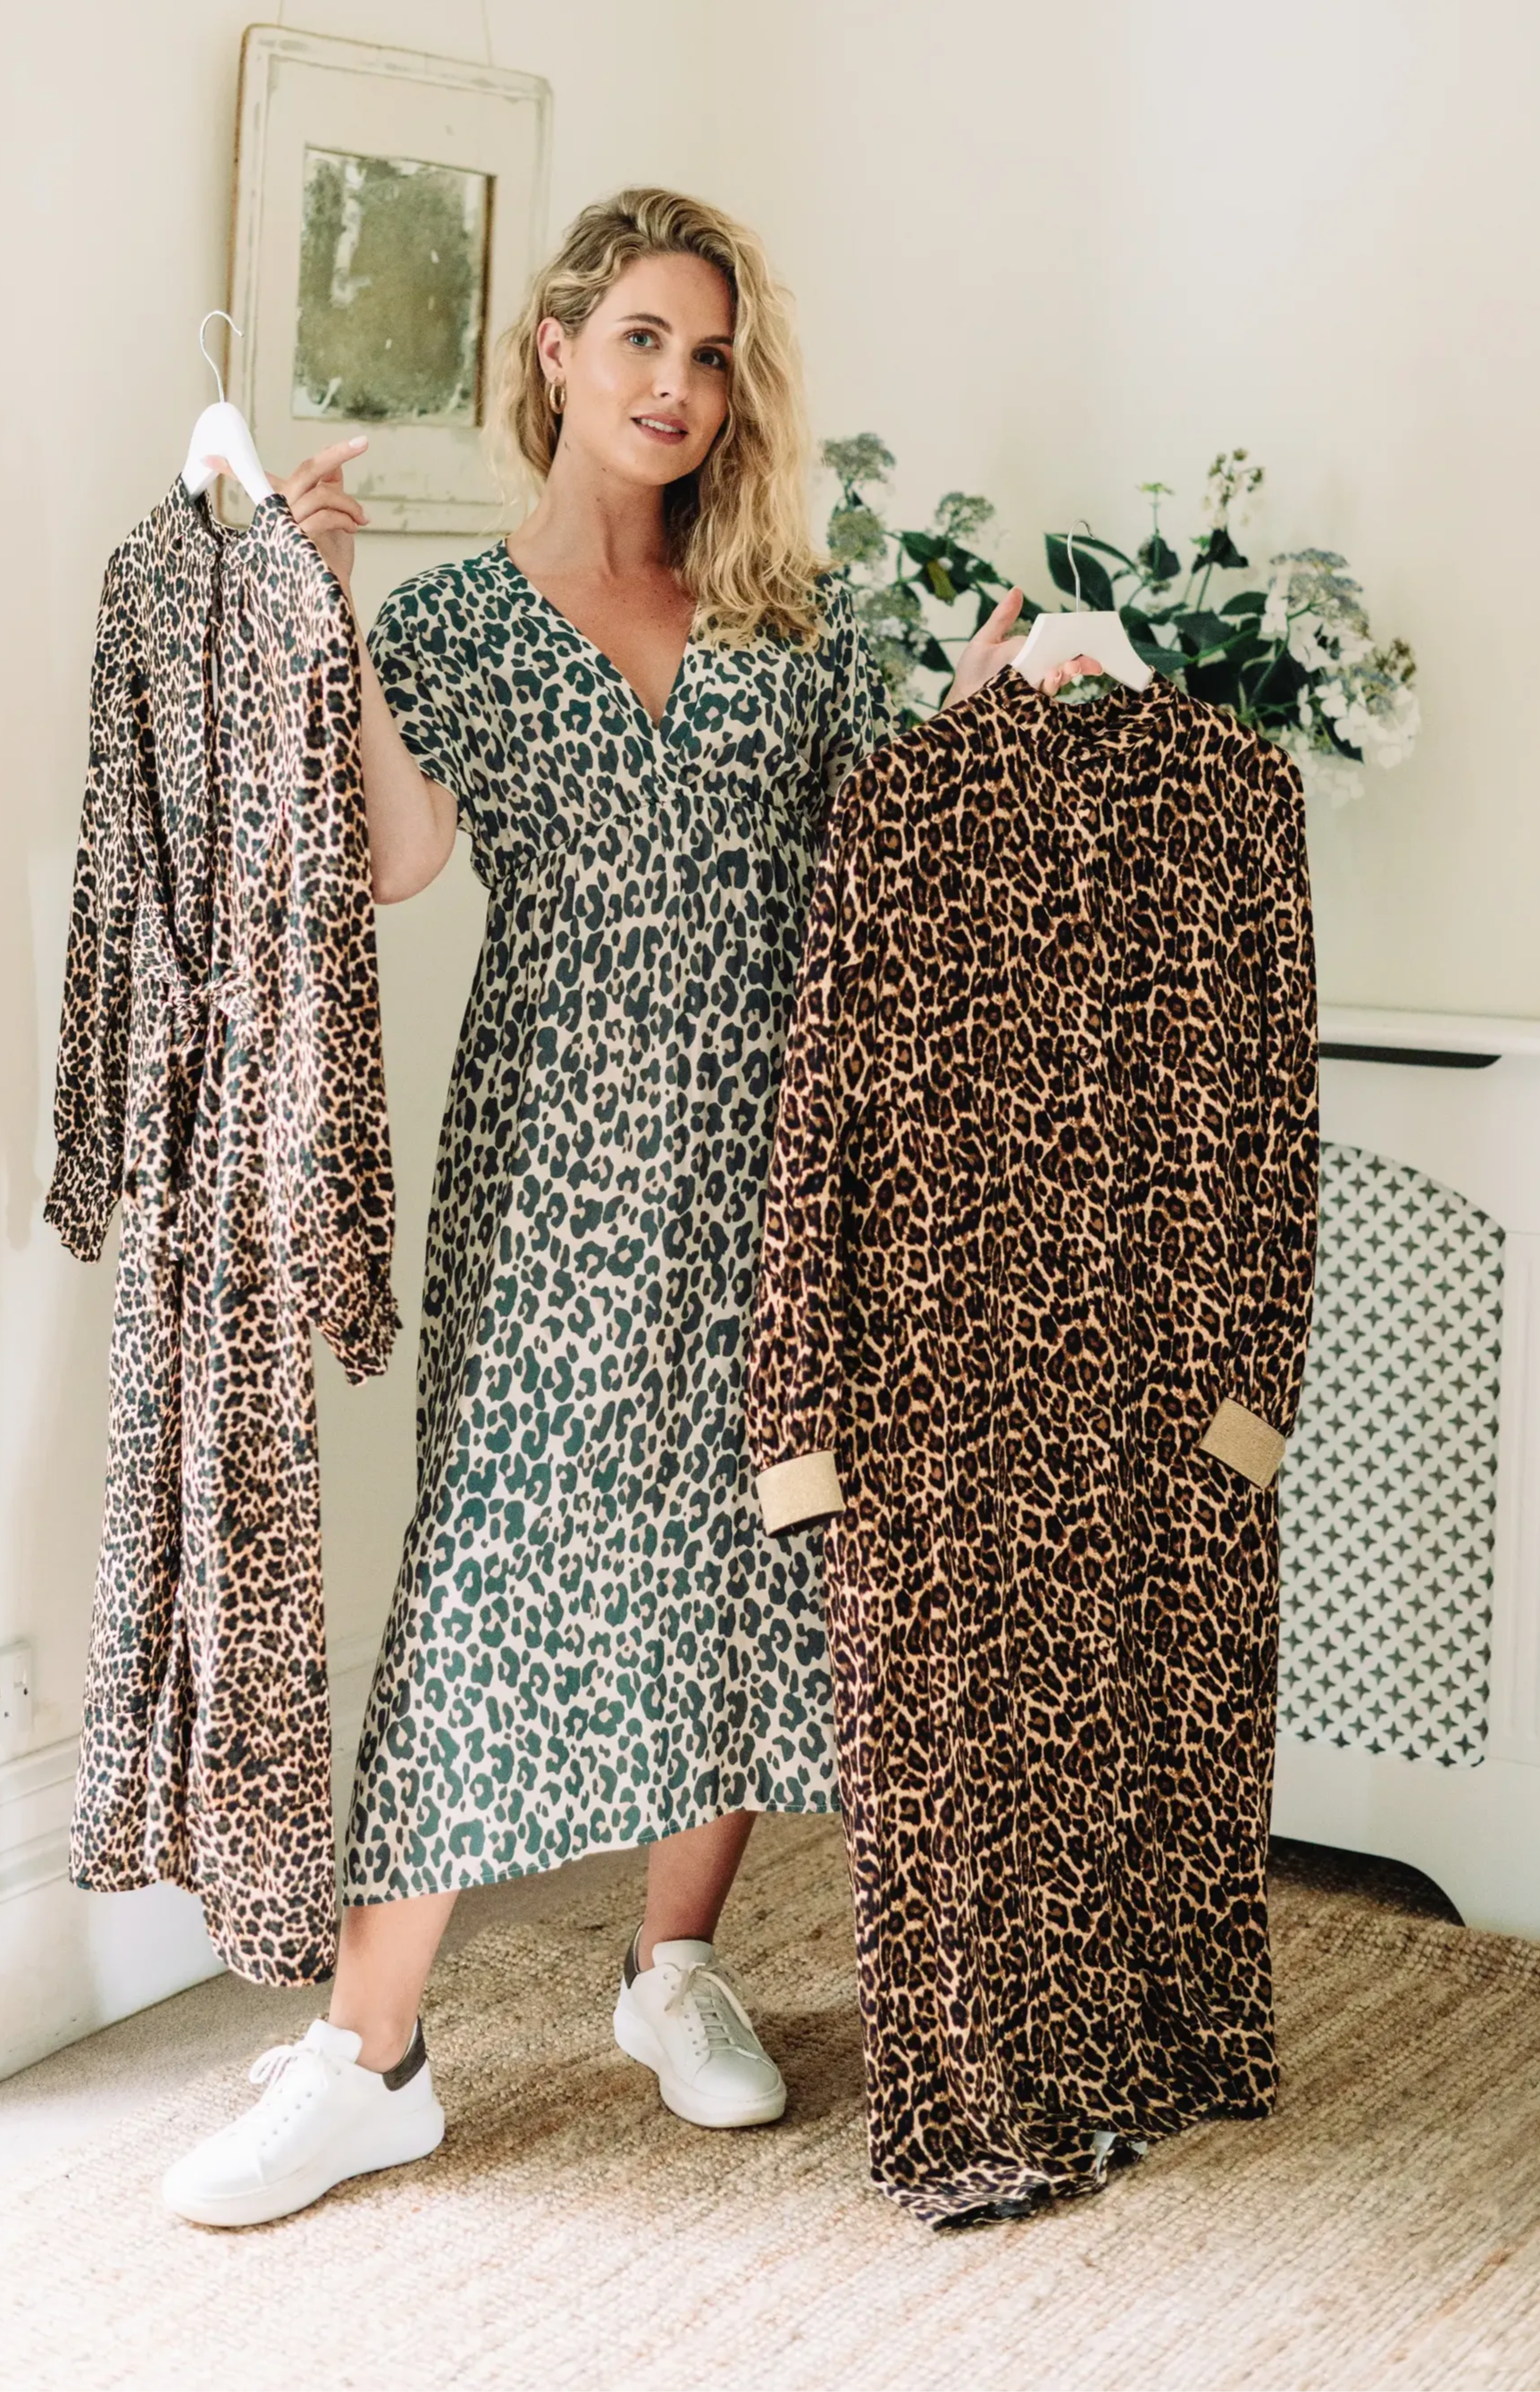 A model wearing a leopard print midi dress with short sleeves and white trainers holding two other leopard print dresses